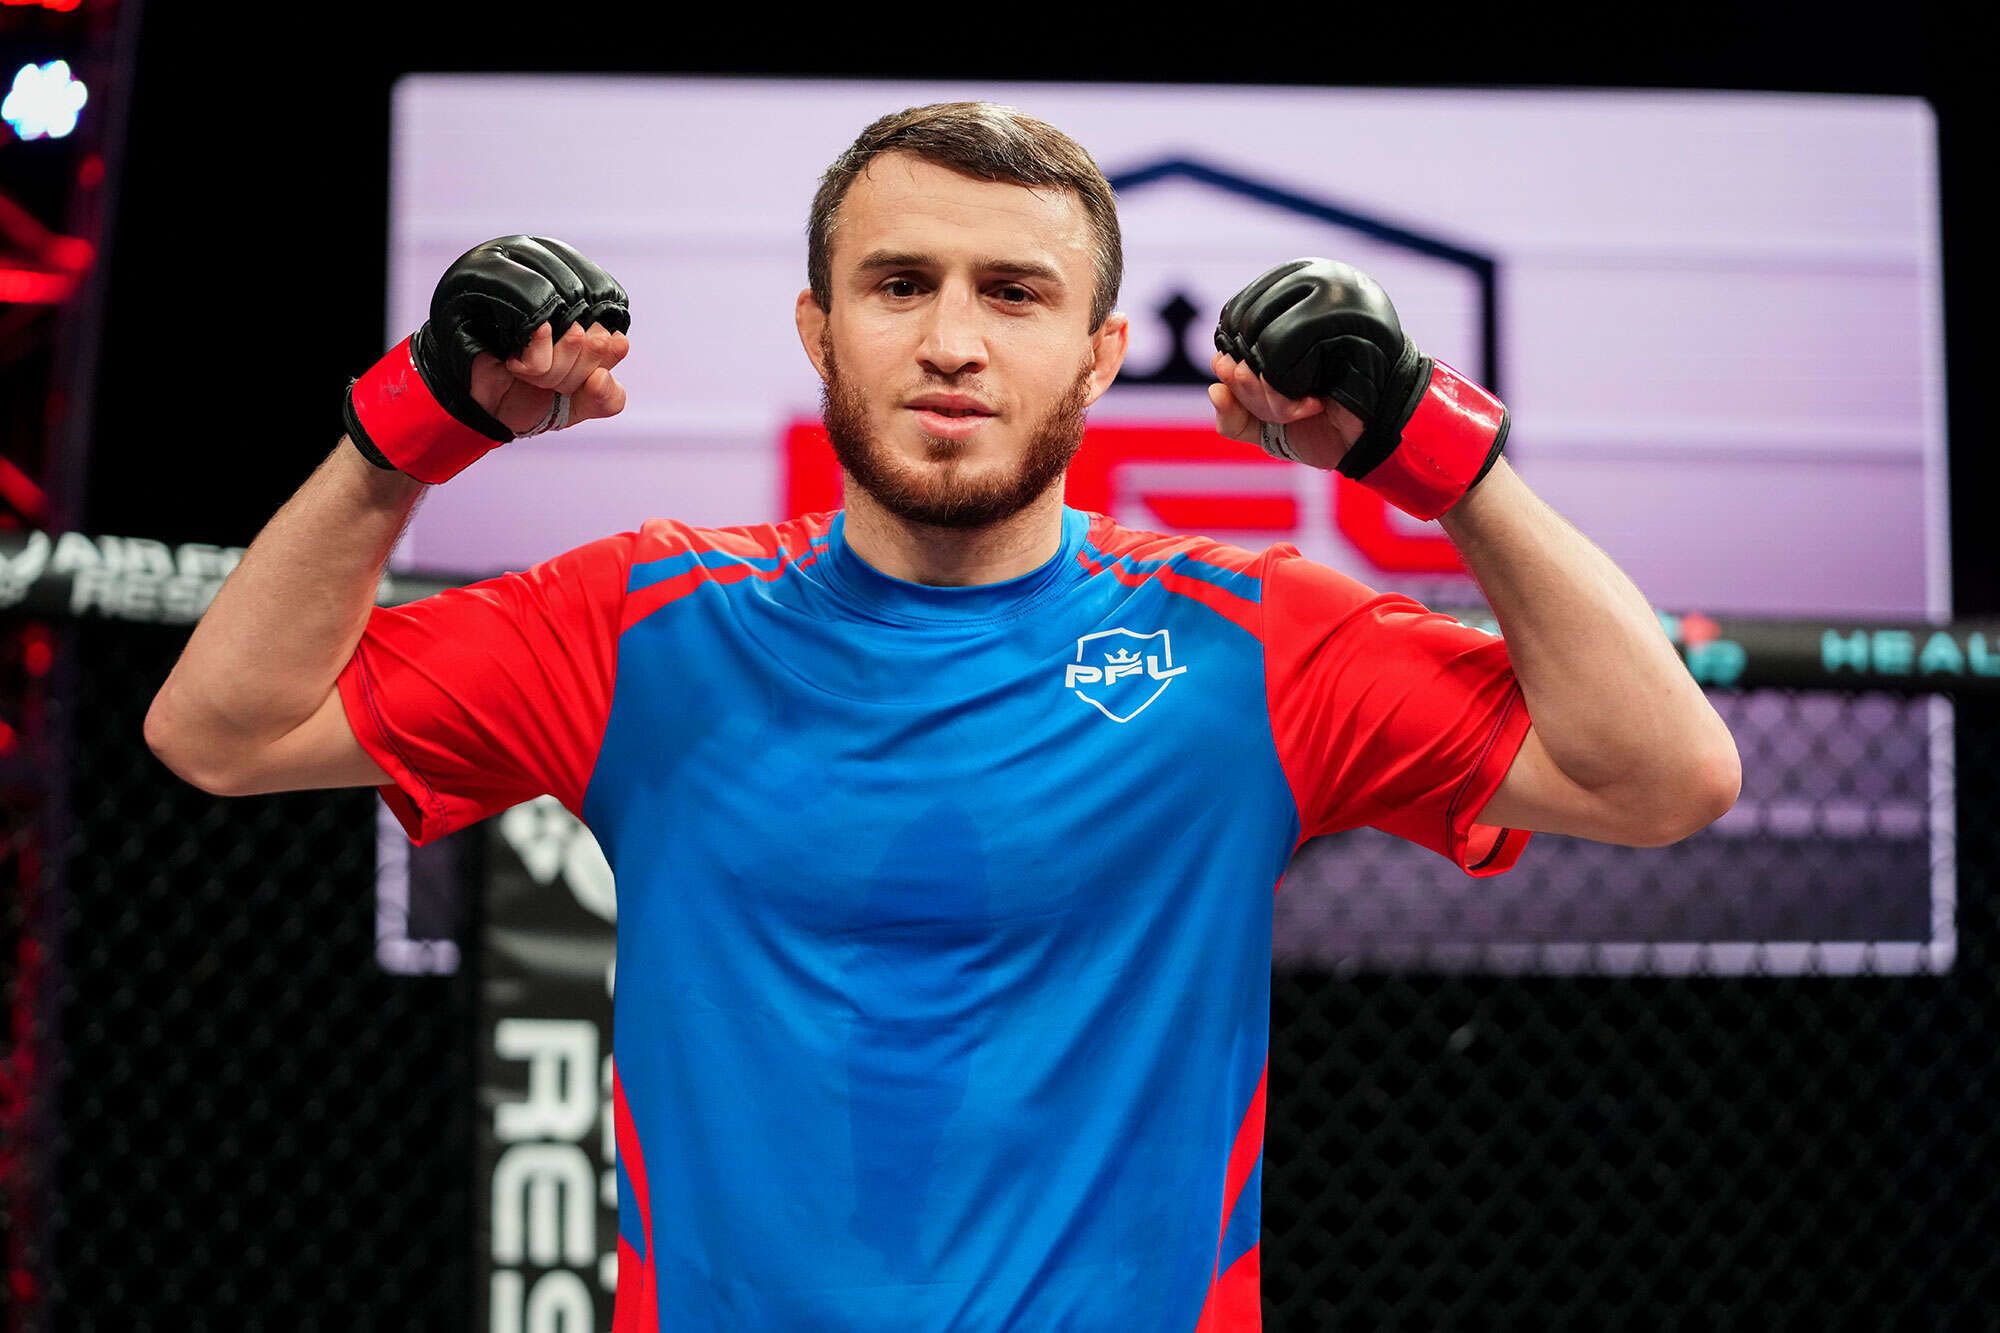 Magomed Magomedkerimov vs. Ben Egli: Preview, Where to Watch and Betting Odds